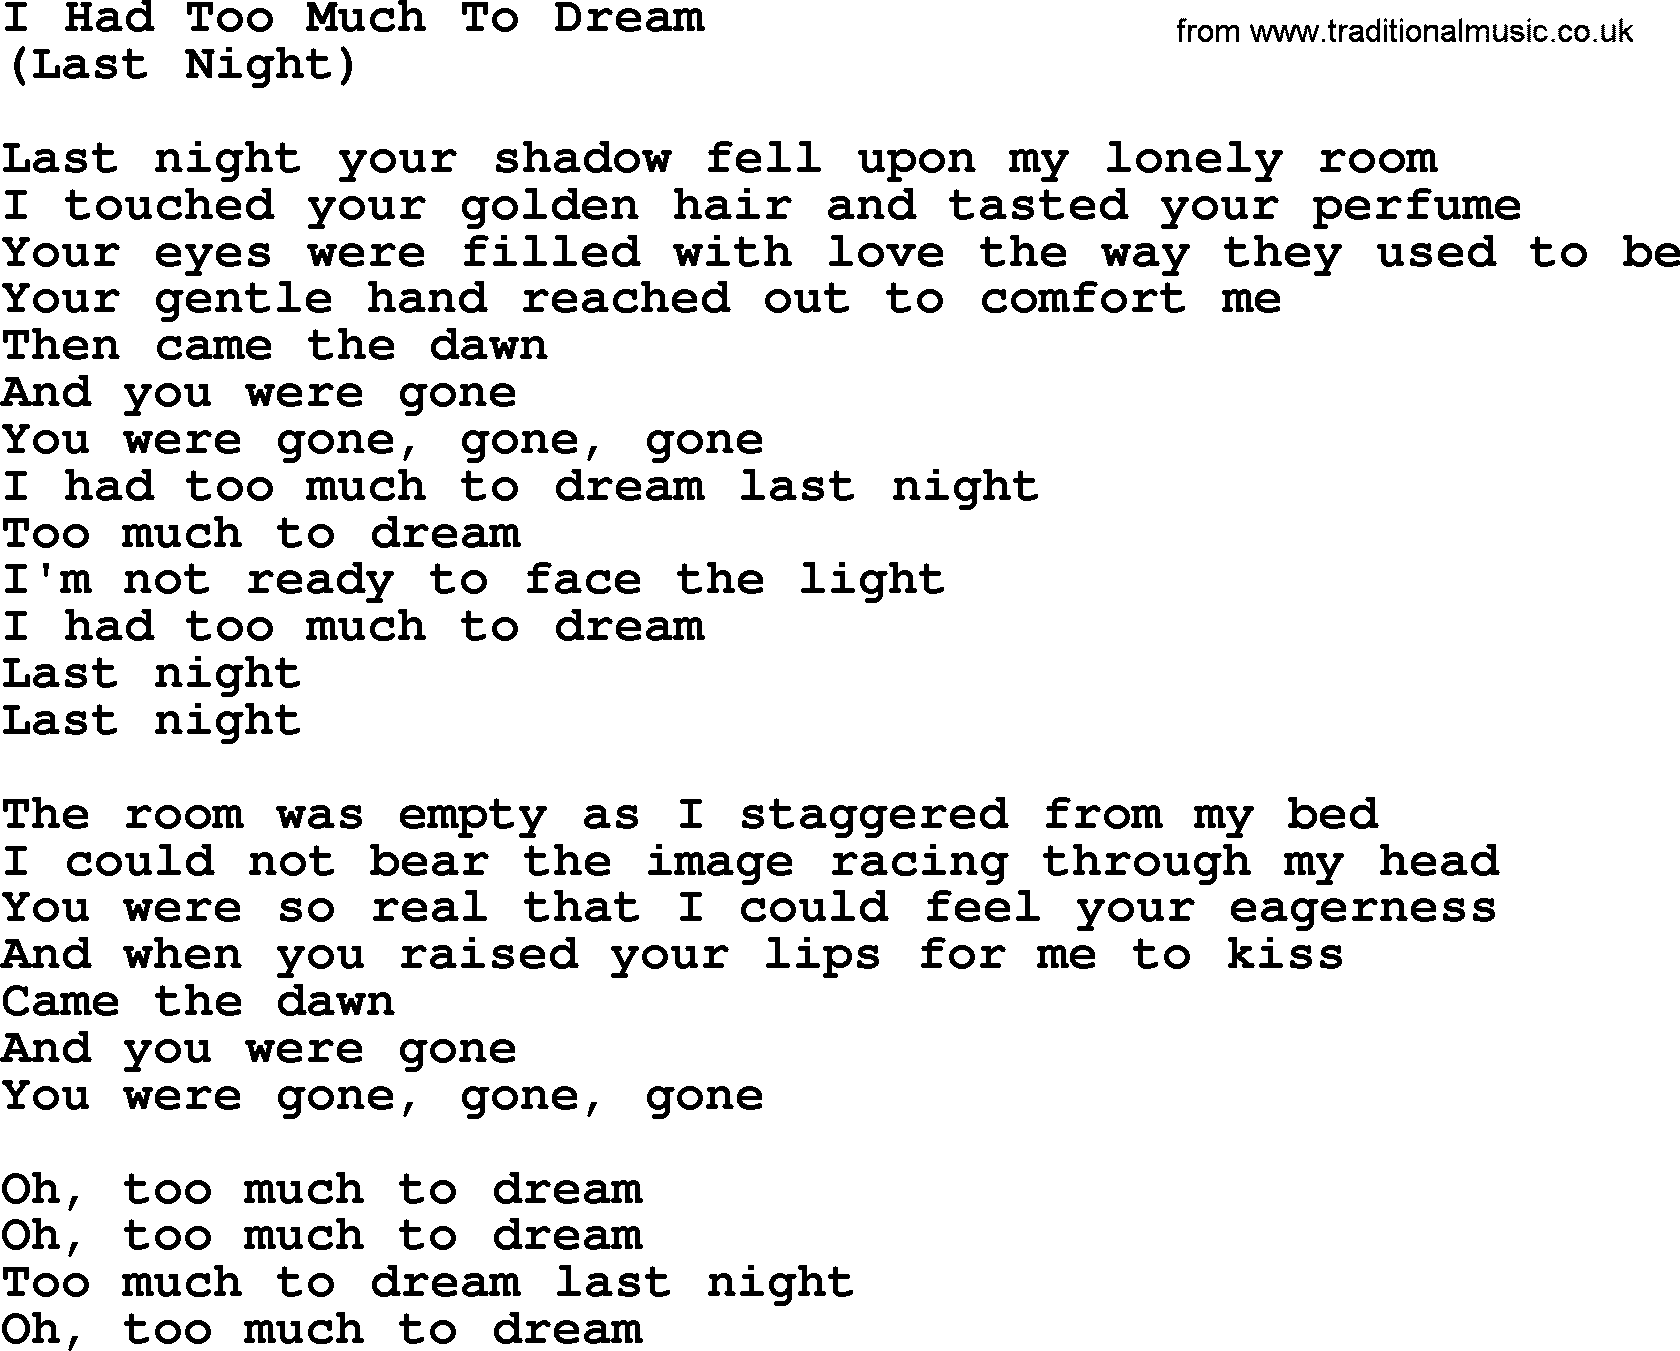 The Byrds song I Had Too Much To Dream, lyrics